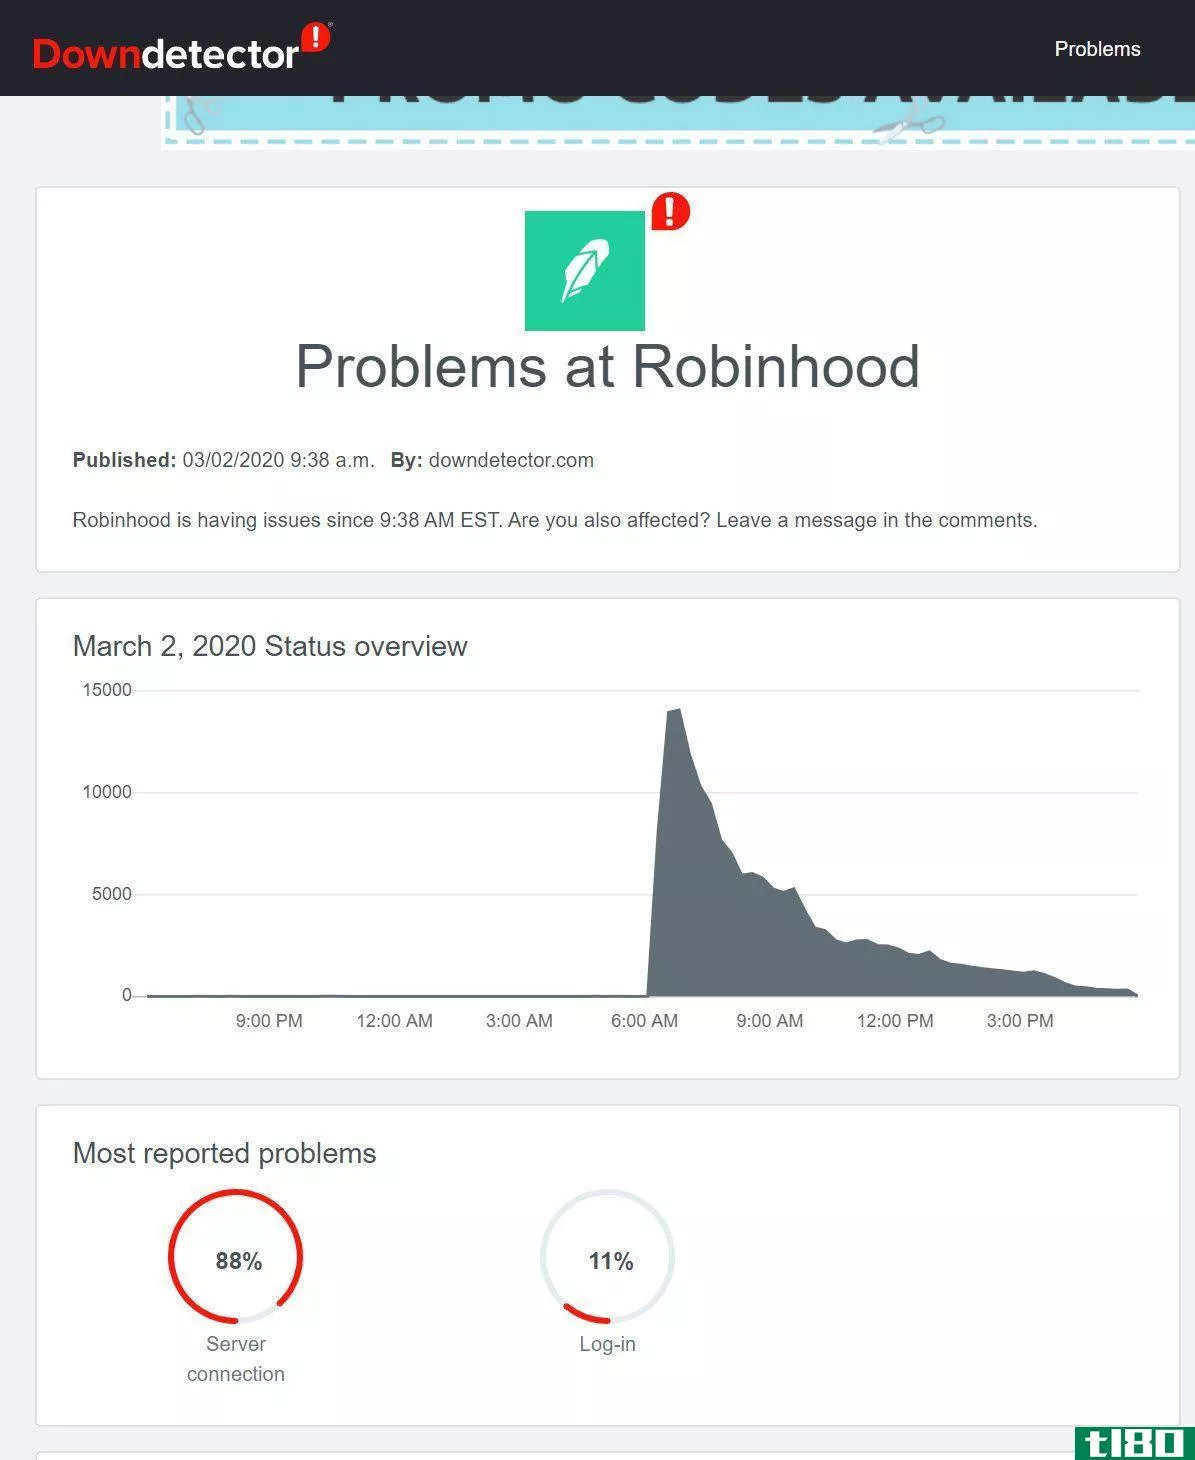 Downdetector report for Robinhood, March 2, 2020